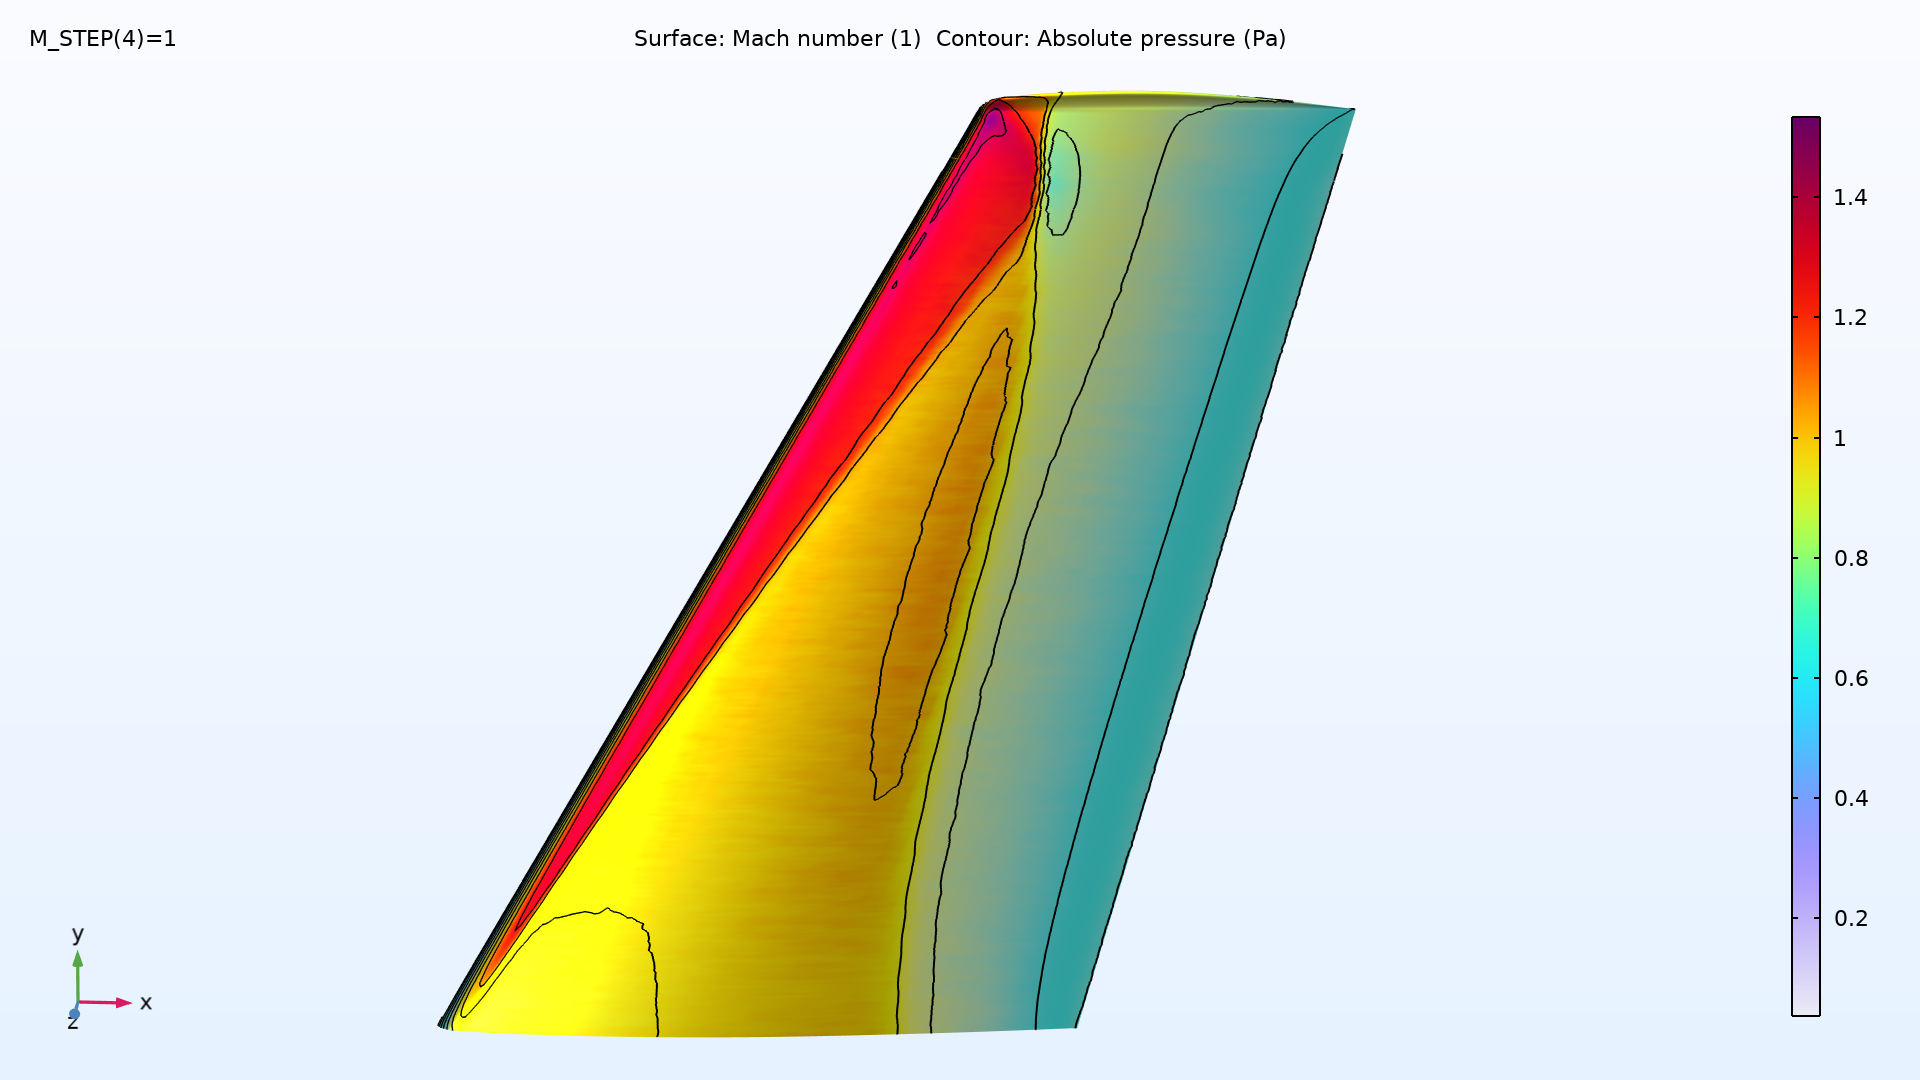 A wing model showing Mach number in the Rainbow color table and pressure as a contour plot.